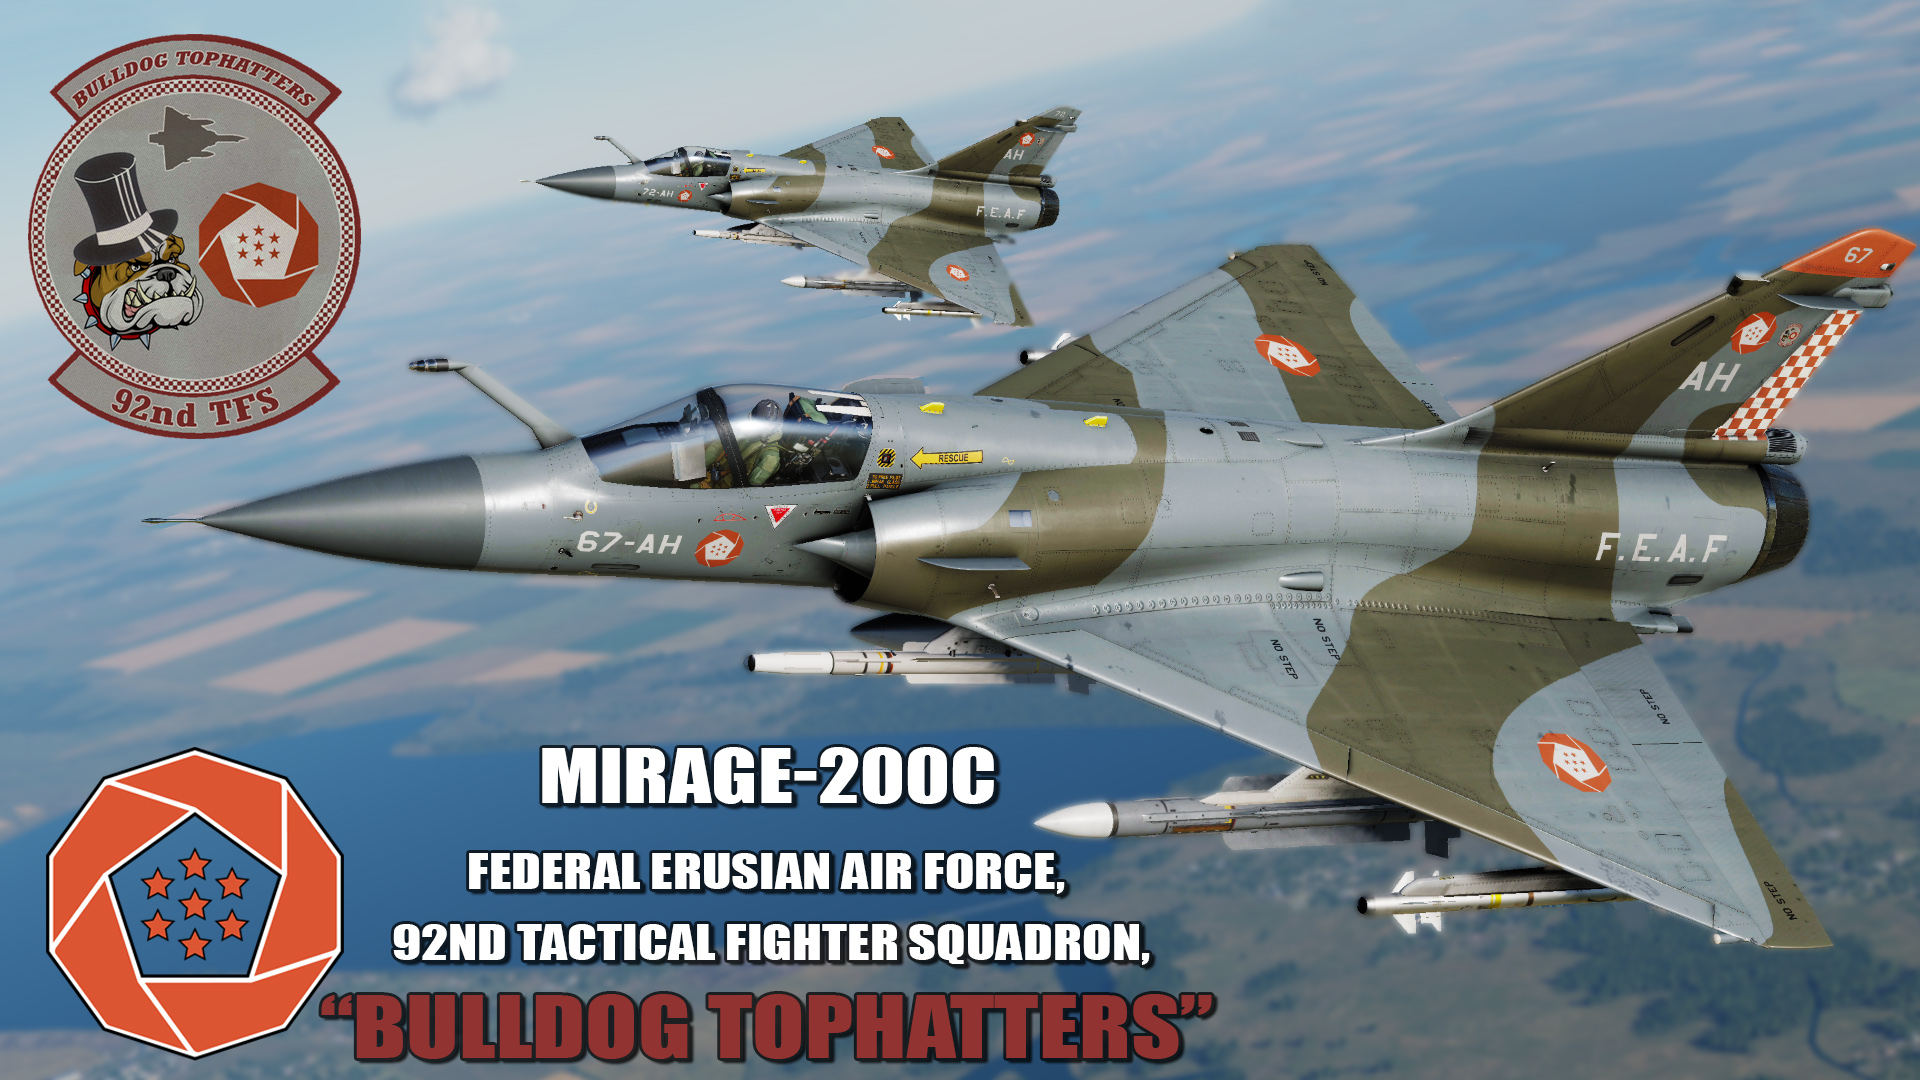 Ace Combat - Federal Erusian Air Force 92nd TFS "Bulldog Tophatters" Mirage 2000C